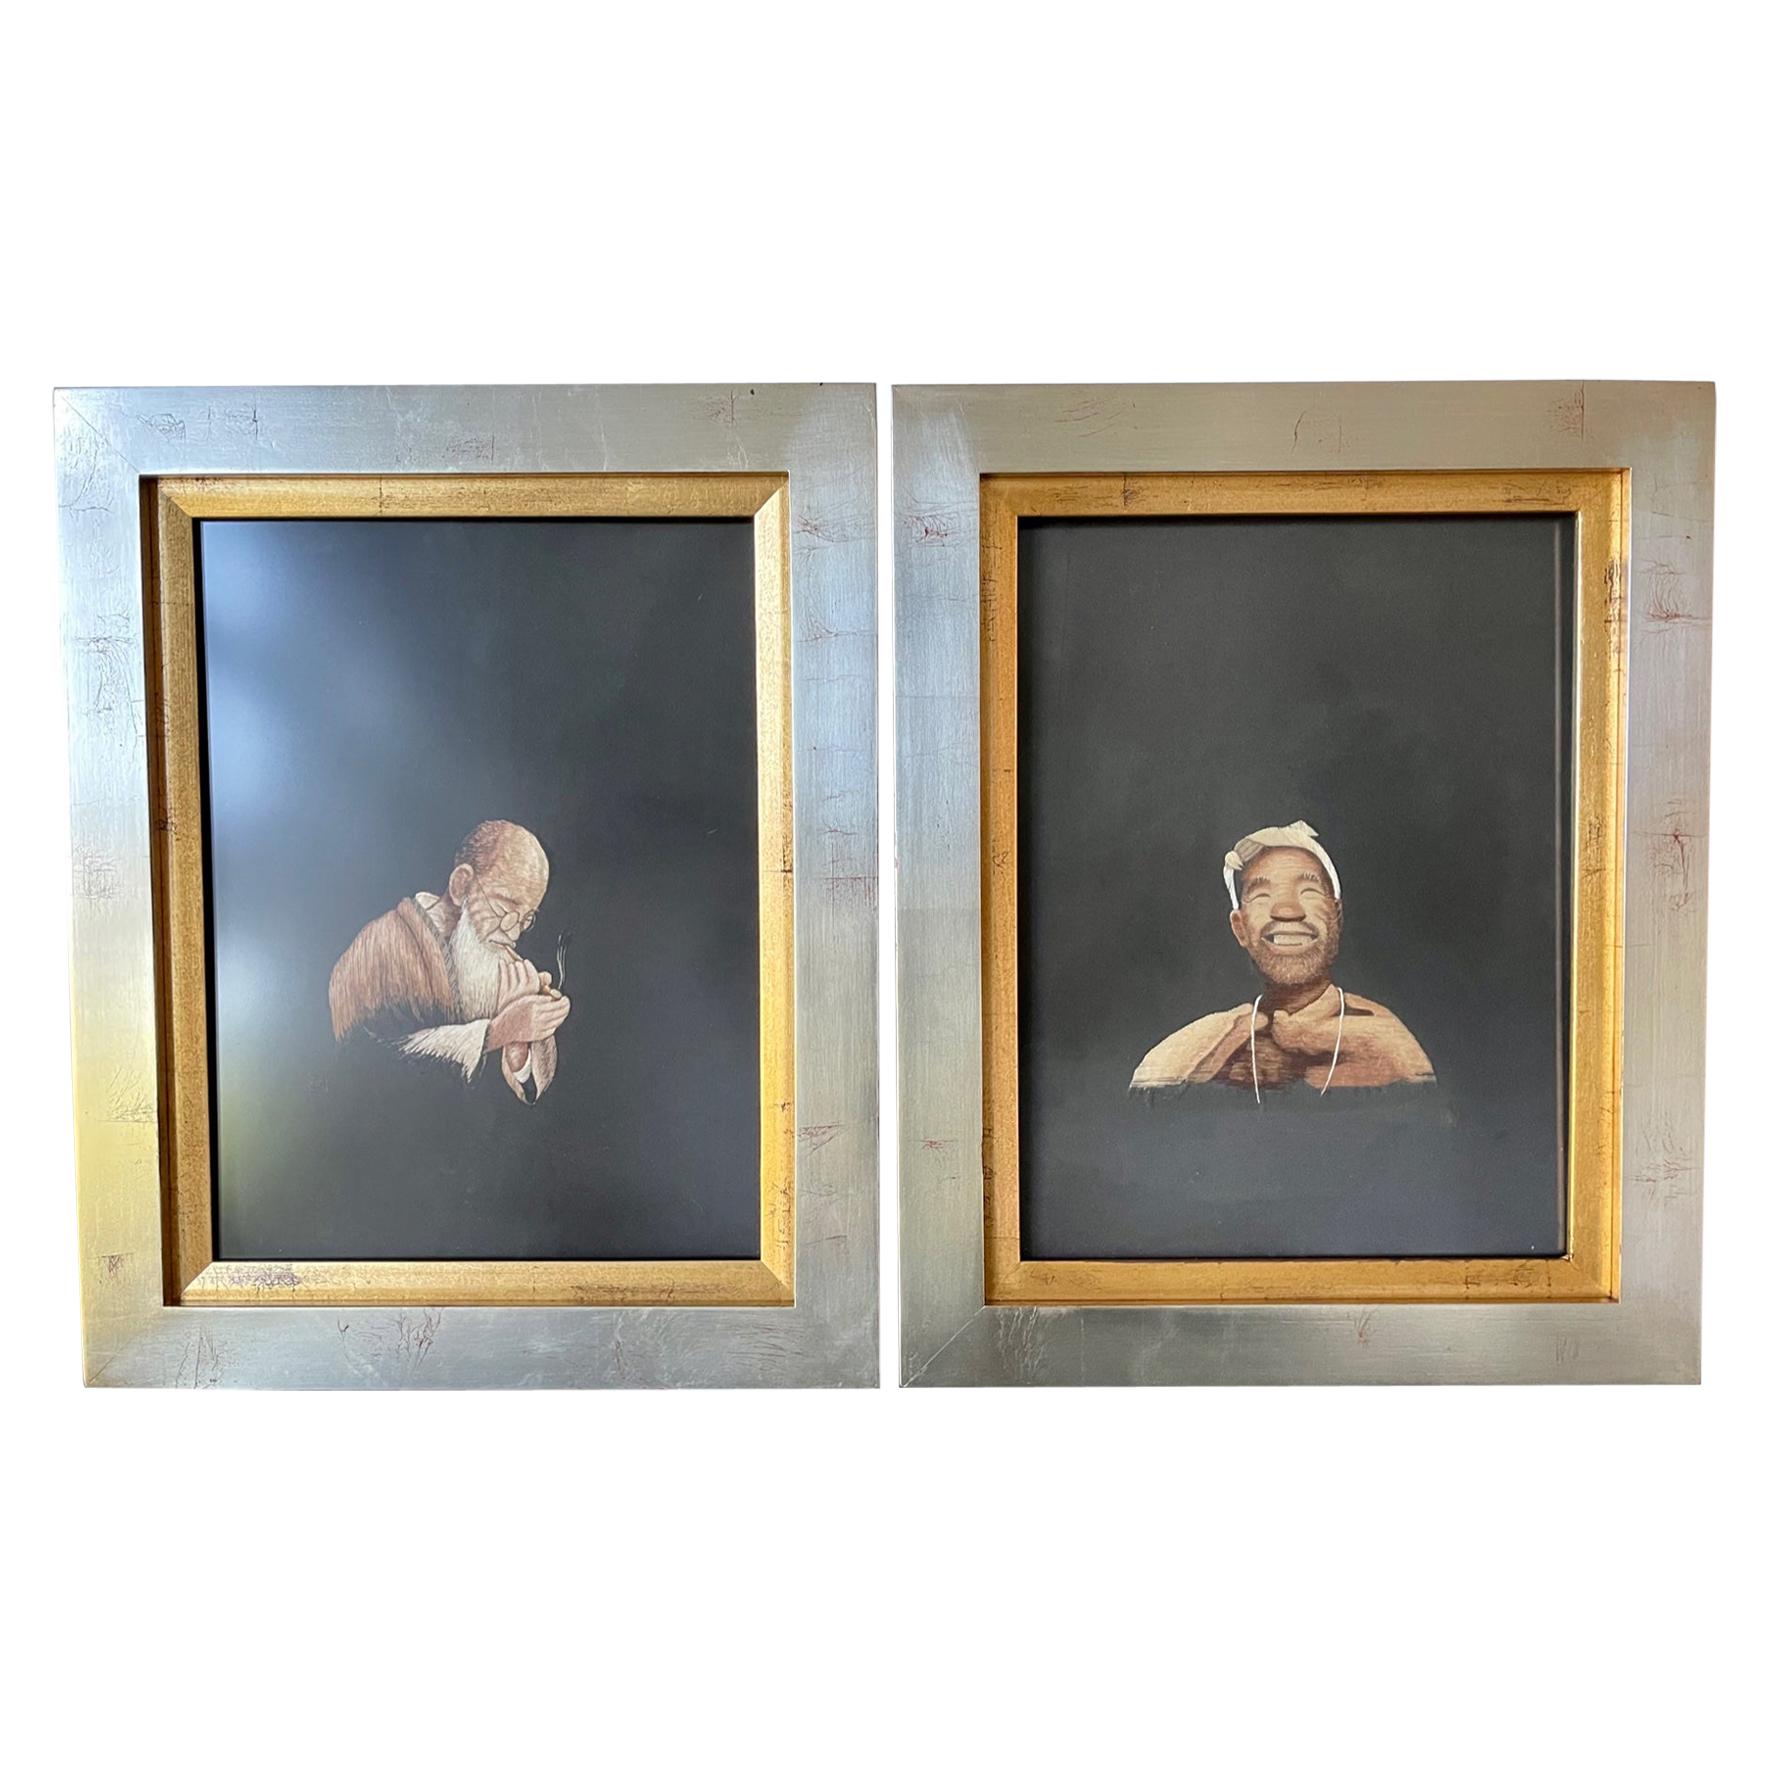 Pair of Framed Japanese Embroidery Art Portraits For Sale